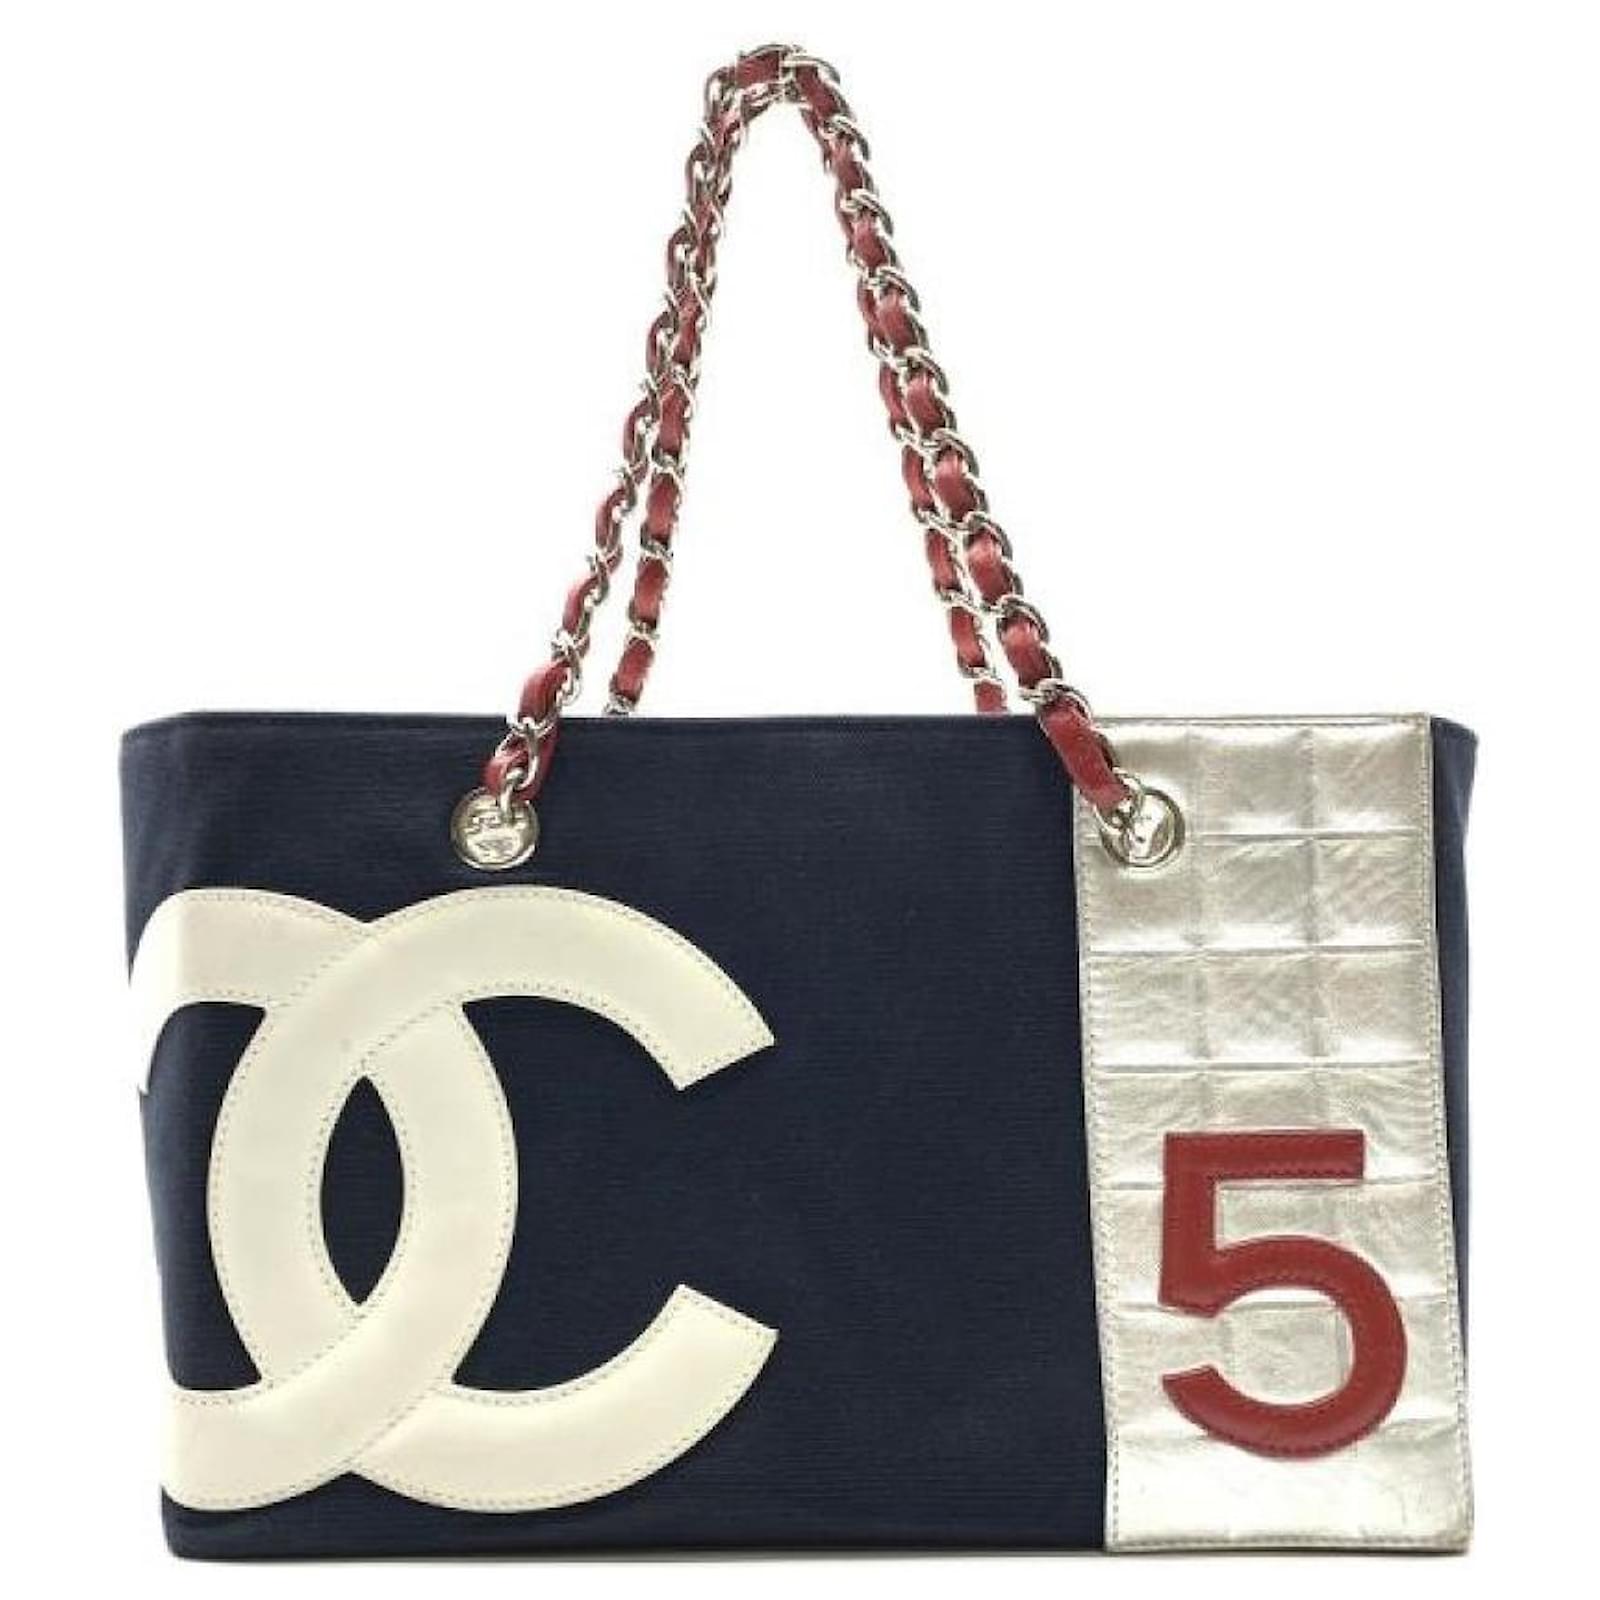 Used] CHANEL Chanel No5 Chain tote bag Shoulder bag Canvas Navy Silver  Silvery Navy blue ref.489828 - Joli Closet